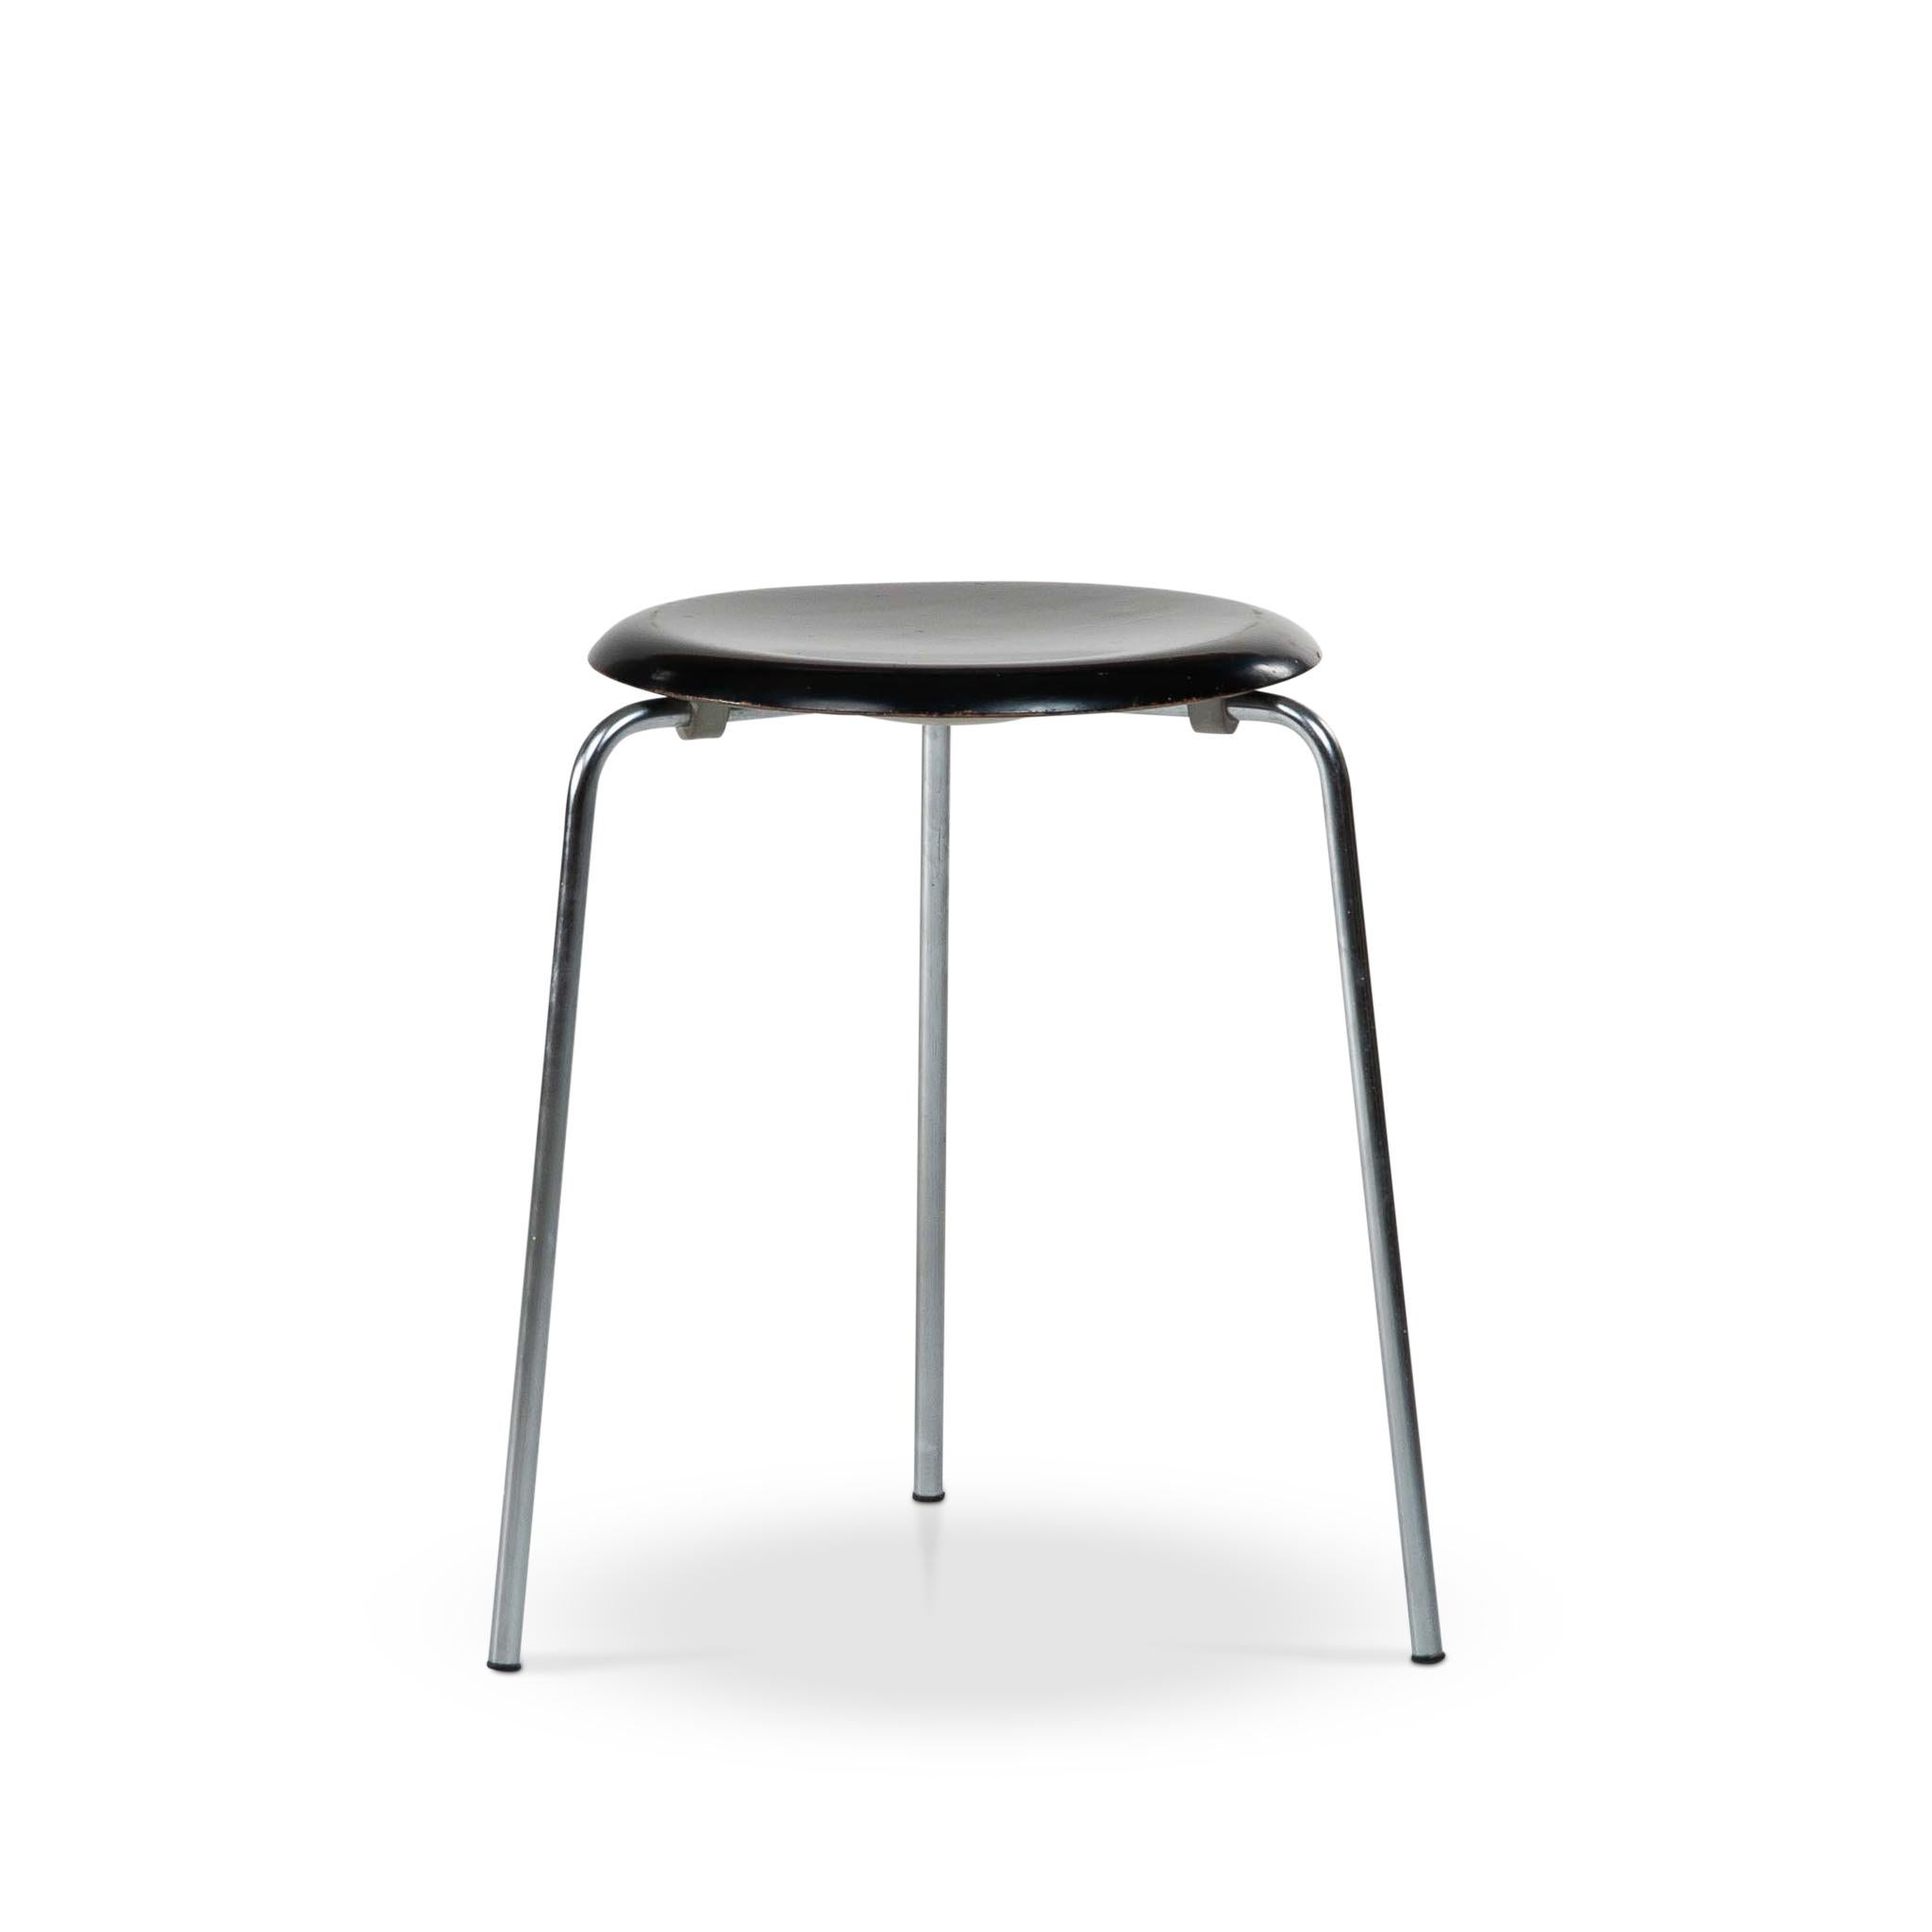 Introducing a pair of black lacquered original vintage Dot tripod stools, model 3107, a design that has become synonymous with Danish Modernism. Created by the legendary Arne Jacobsen for Fritz Hansen in 1954, these stools from 1968 are a testament